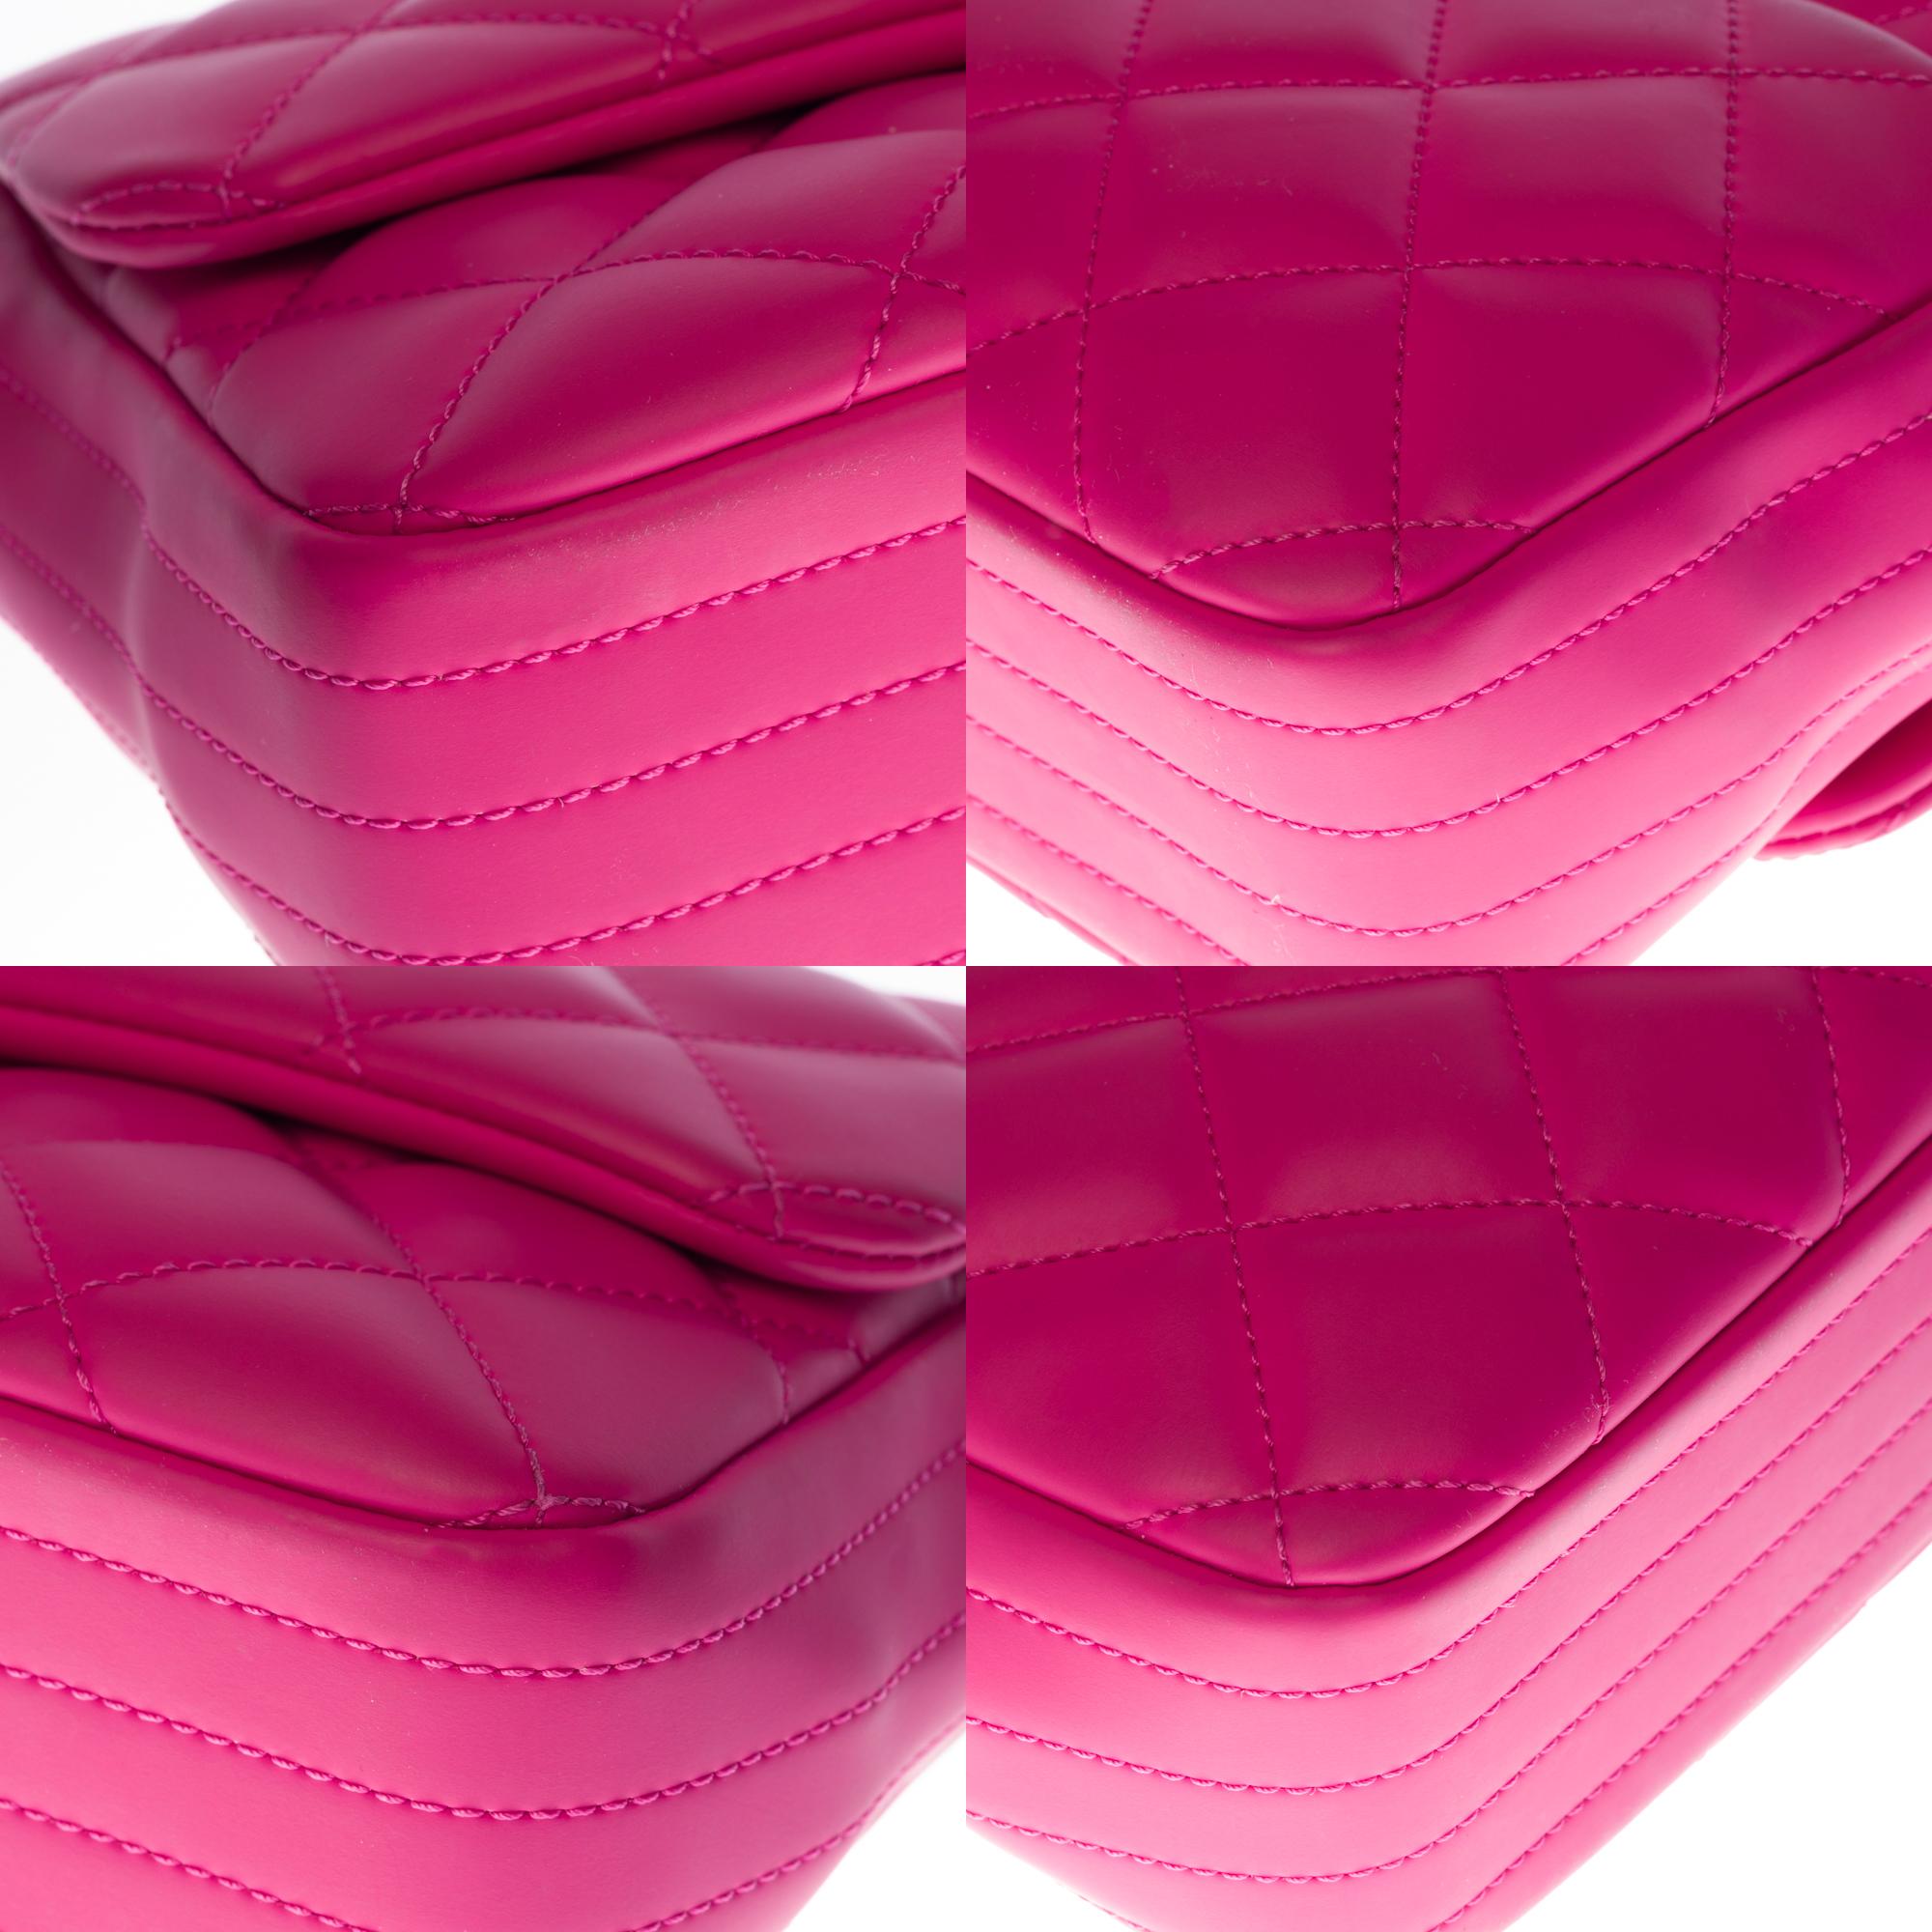 Chanel Classic shoulder Flap bag in hot pink vegan leather and silver hardware 2